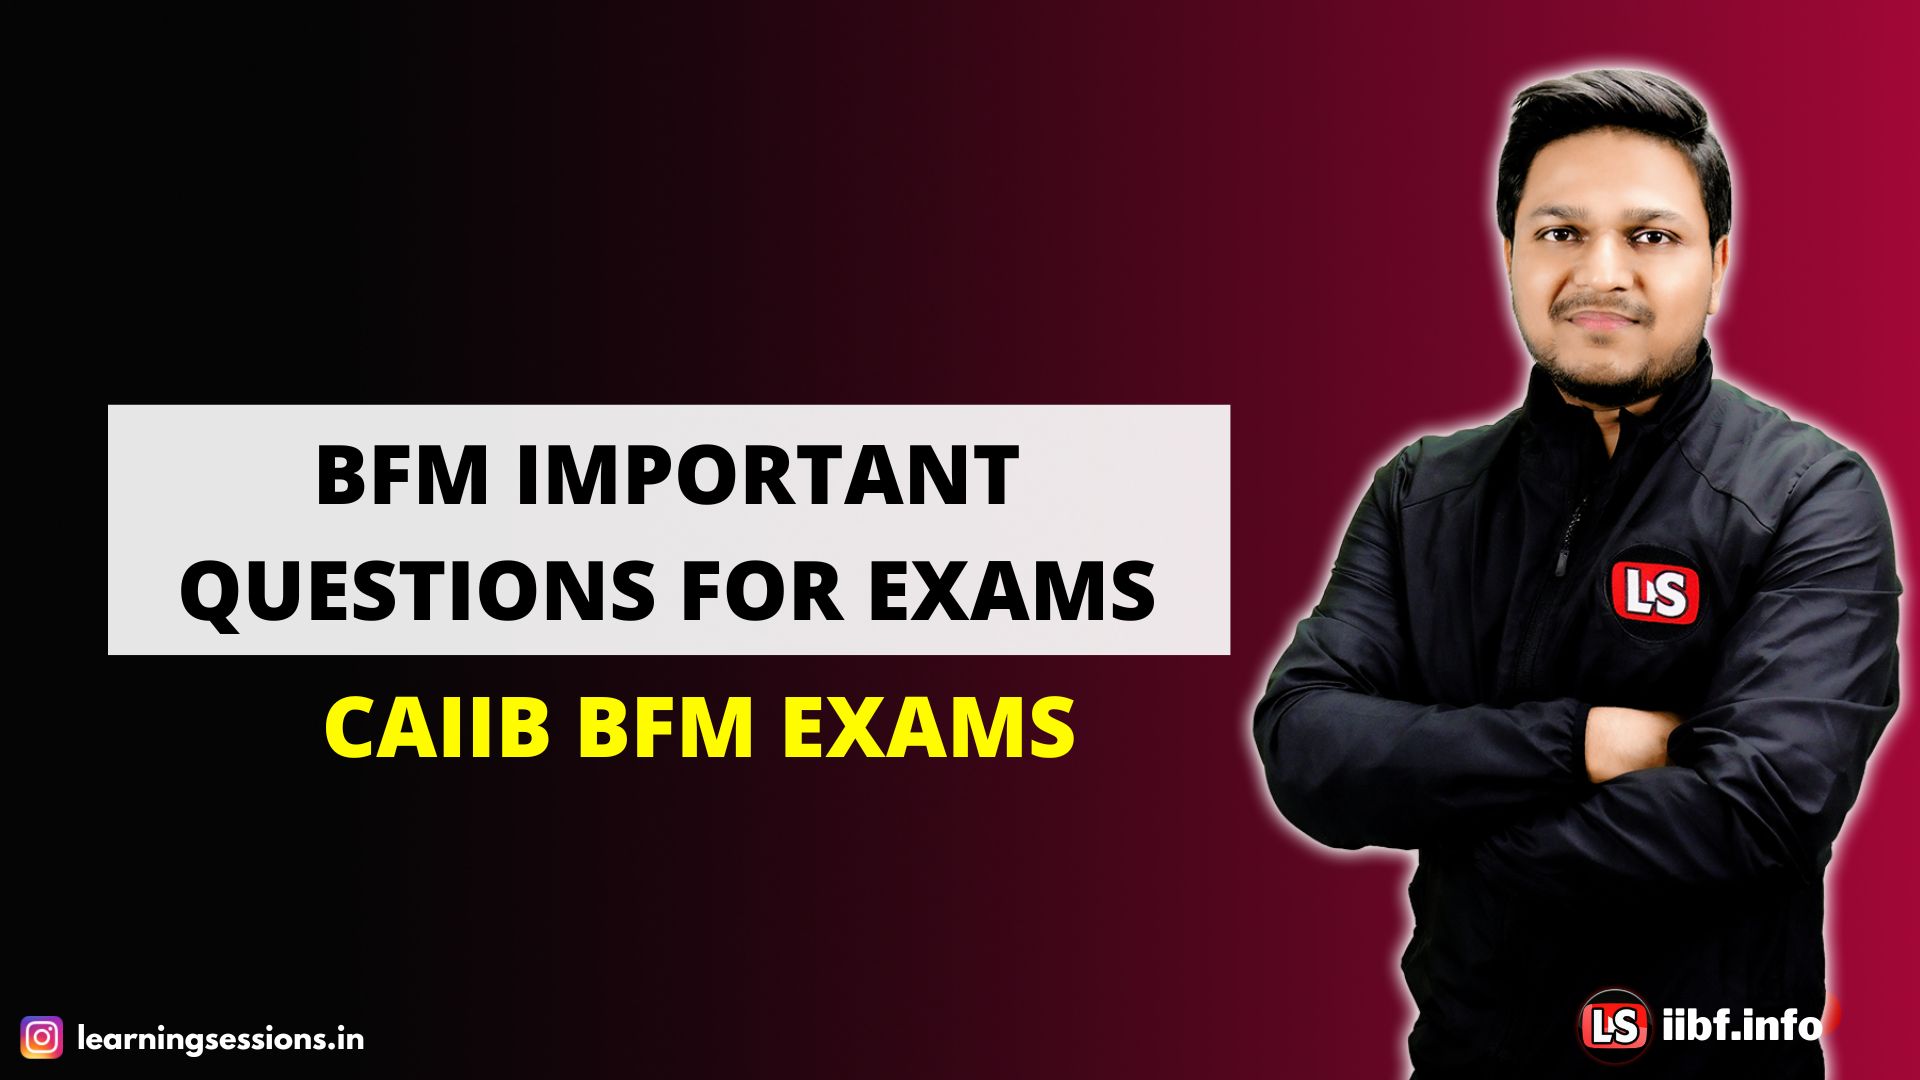 BFM IMPORTANT QUESTIONS | CAIIB 2022 EXAMS | IIBF BANK FINANCIAL MANAGEMENT LATEST VIDEOS